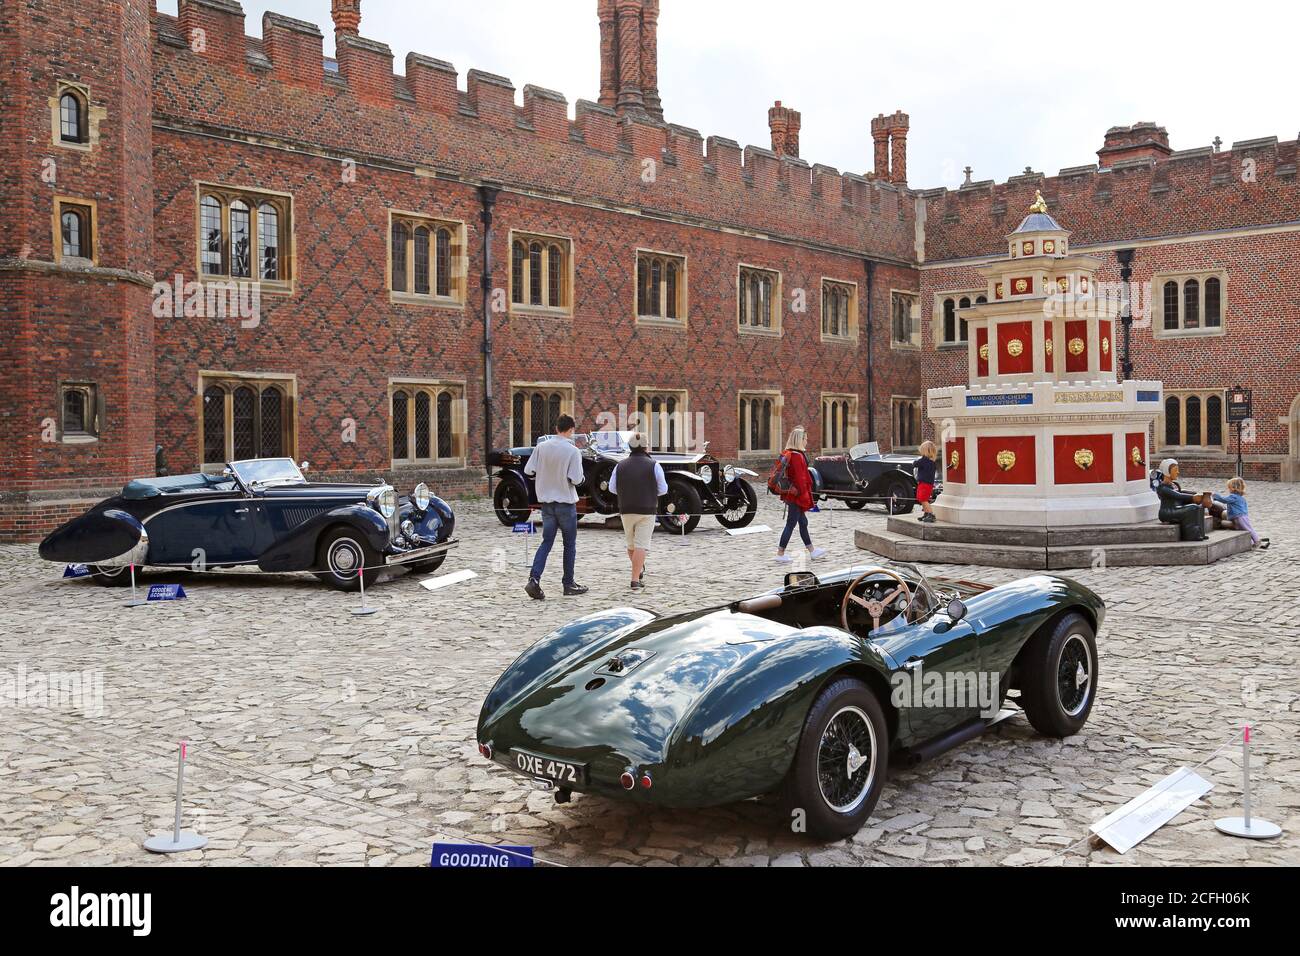 Display of Auction Lots in Base Court, Gooding Classic Car Auction, 5 September 2020. Hampton Court Palace, London, UK, Europe Stock Photo